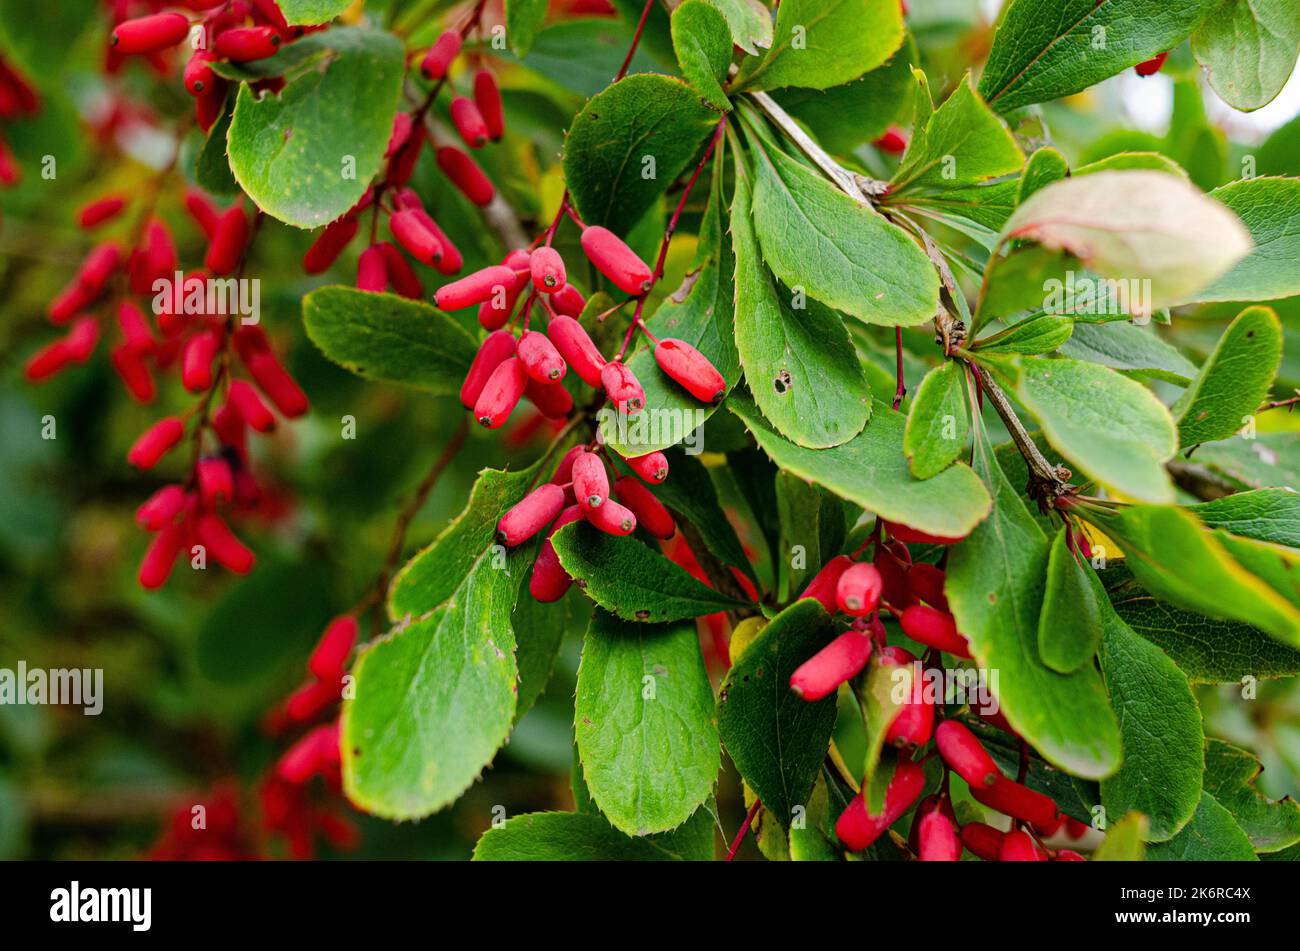 barberry ripe and unripe fruits on branches, group of berry-like pome fruits called serviceberry or juneberry Stock Photo